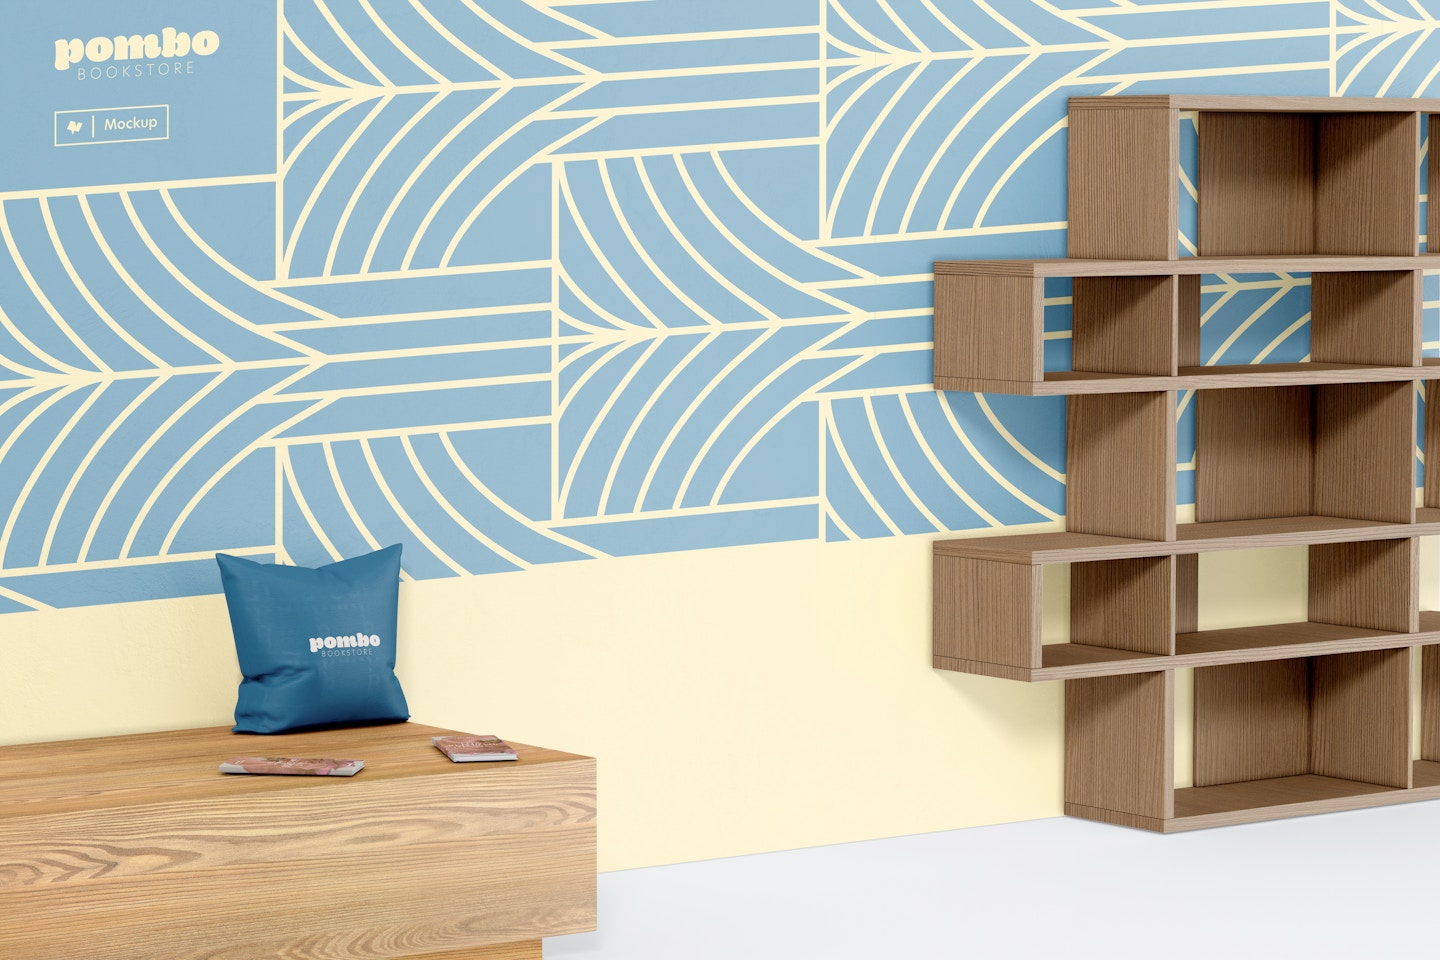 Modern Bookstore Wall Mockup, with Bench